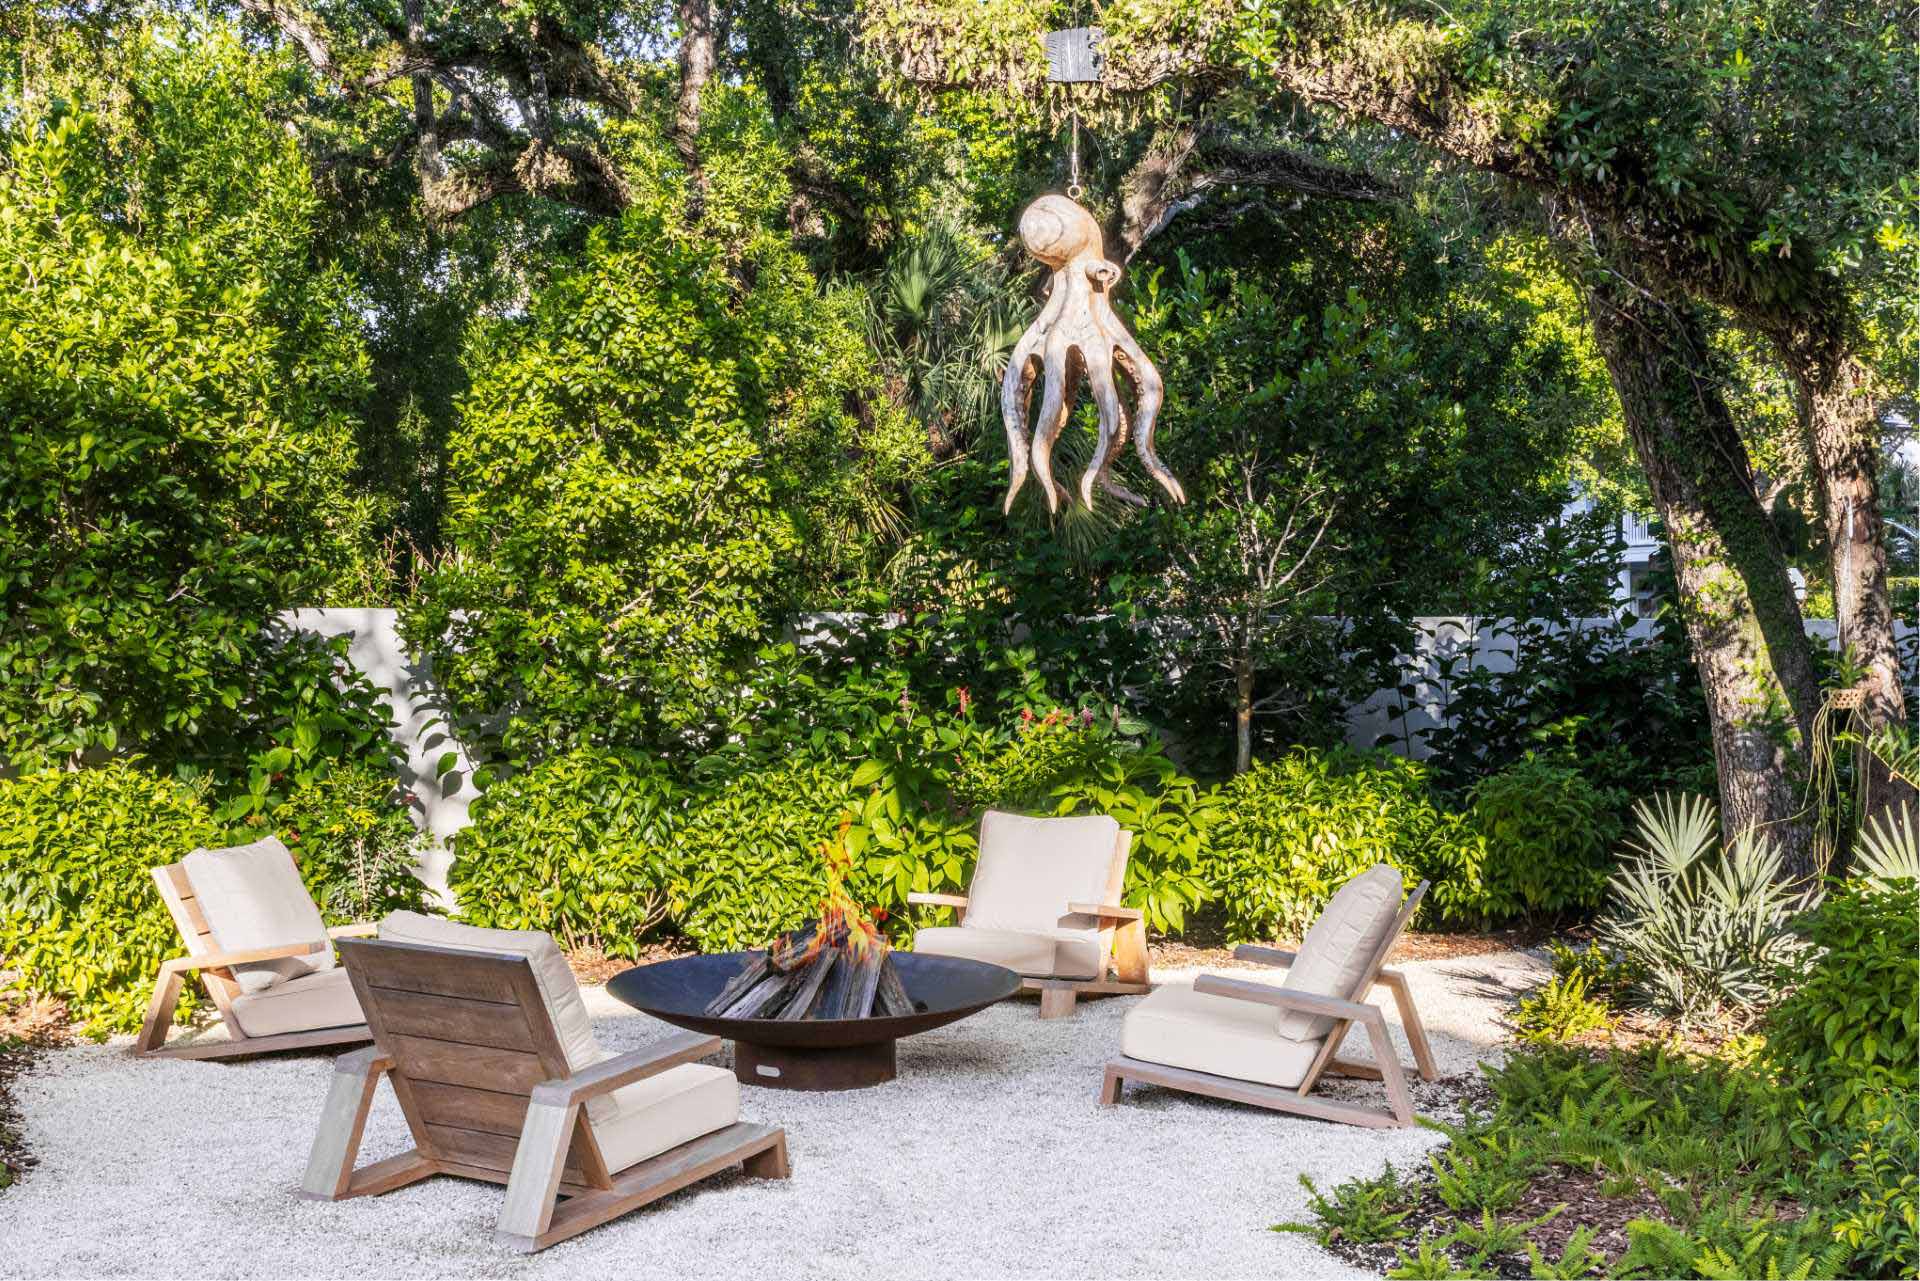 An outdoor seating area that features a fire pit and evocative sculpture hanging above.